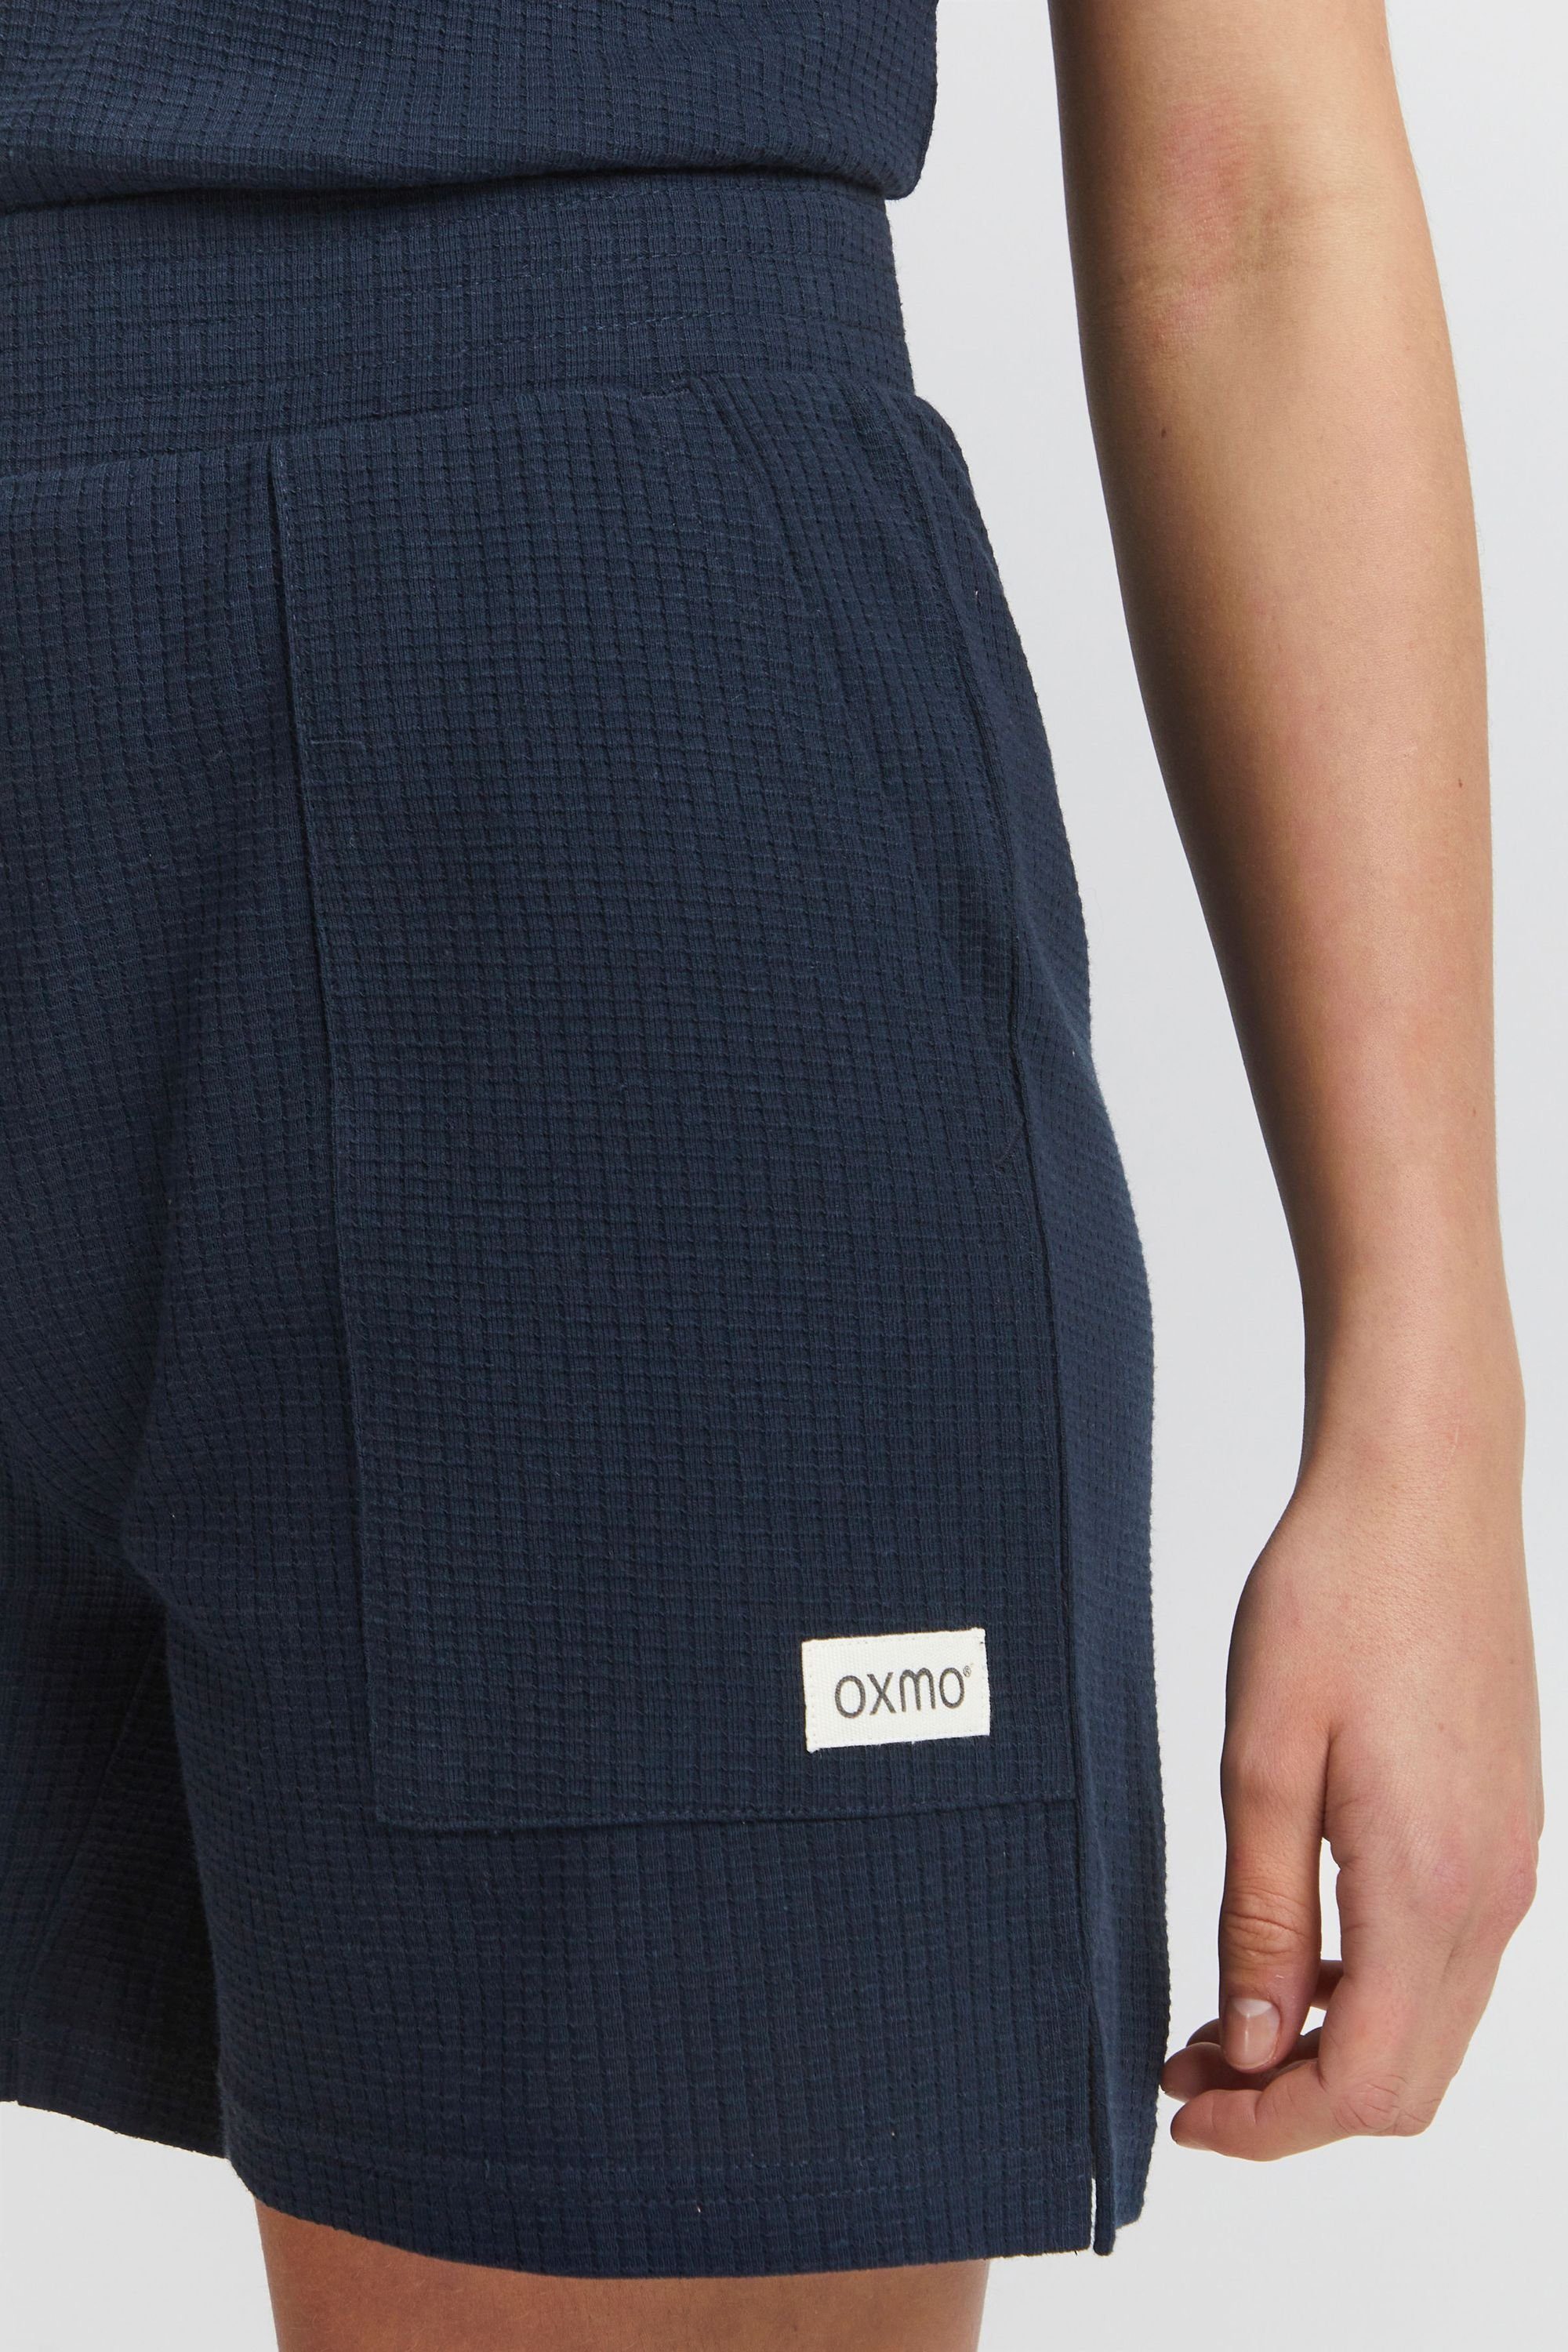 OXMO Eclipse Wim (194010) Shorts Total